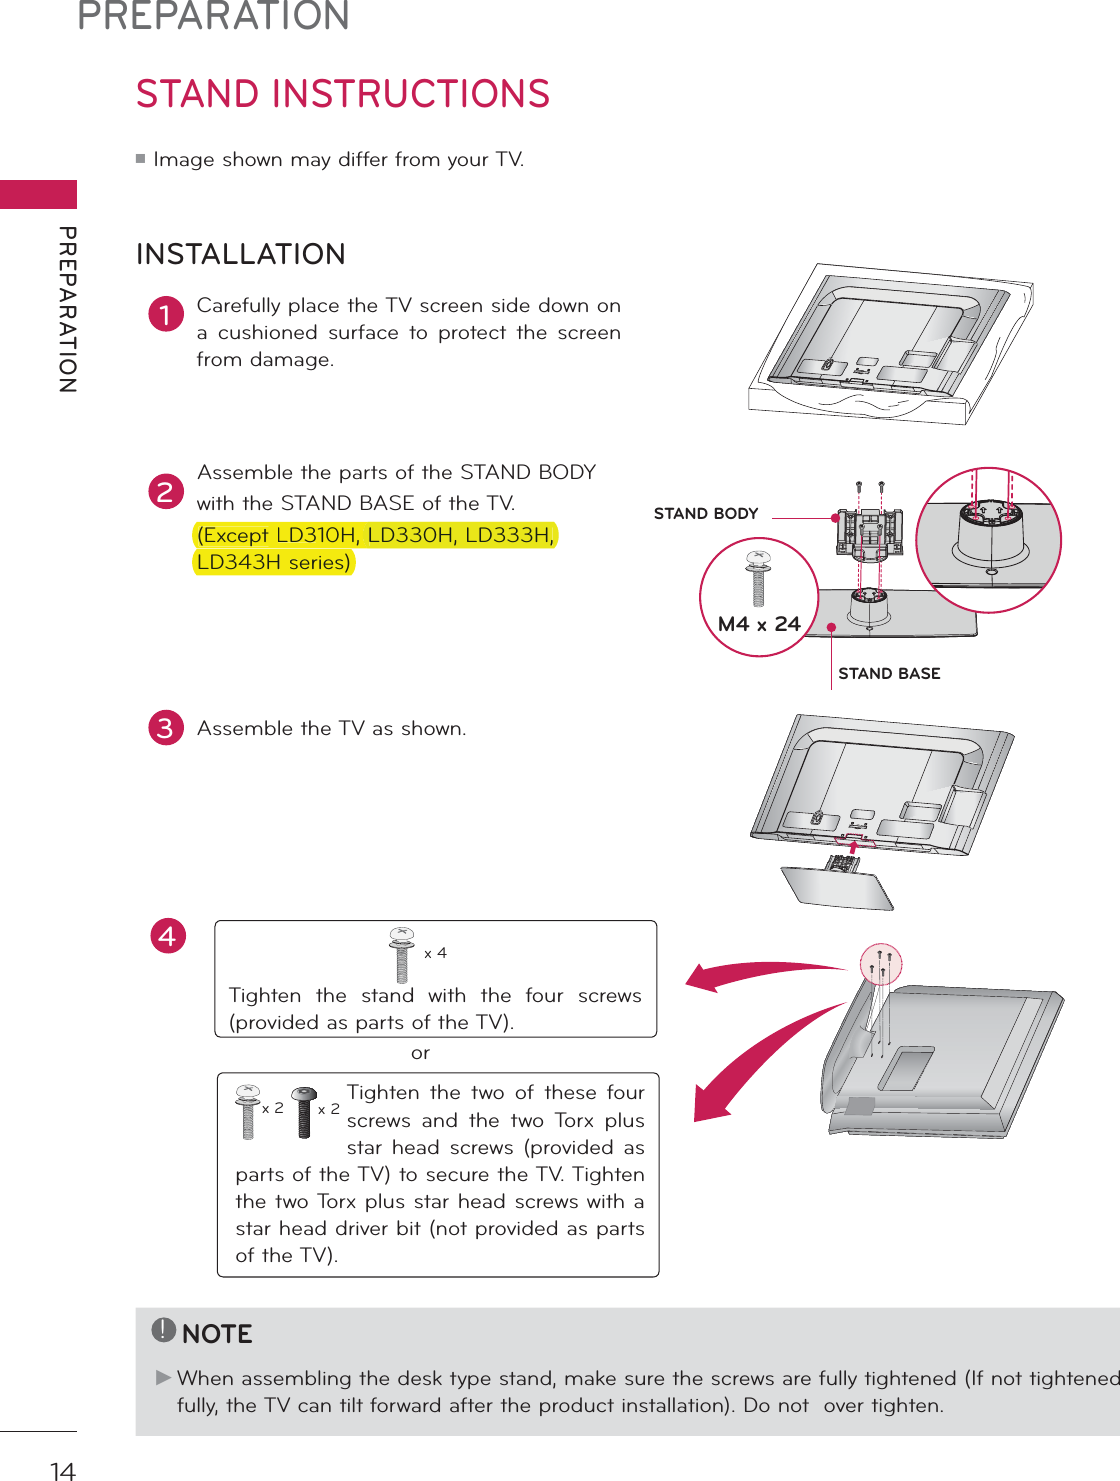 PREPARATIONPREPARATION14STAND INSTRUCTIONS ᯫ Image shown may differ from your TV.1Carefully place the TV screen side down on a cushioned surface to protect the screen from damage.2Assemble the parts of the STAND BODYwith the STAND BASE of the TV. (Except LD310H, LD330H, LD333H, LD343H series)INSTALLATION!NOTEŹ When assembling the desk type stand, make sure the screws are fully tightened (If not tightened fully, the TV can tilt forward after the product installation). Do not  over tighten.3Assemble the TV as shown.Tighten the stand with the four screws (provided as parts of the TV).x 4orTighten the two of these four screws and the two Torx plus star head screws (provided as parts of the TV) to secure the TV. Tighten the two Torx plus star head screws with a star head driver bit (not provided as parts of the TV).x 2 x 2M4 x 24STAND BASESTAND BODYAC  INCABLE  MANAGEMENTAC  INCABLE  MANAGEMENT4(ExceptLD310H,LD330H,LD333H,LD343Hseries)